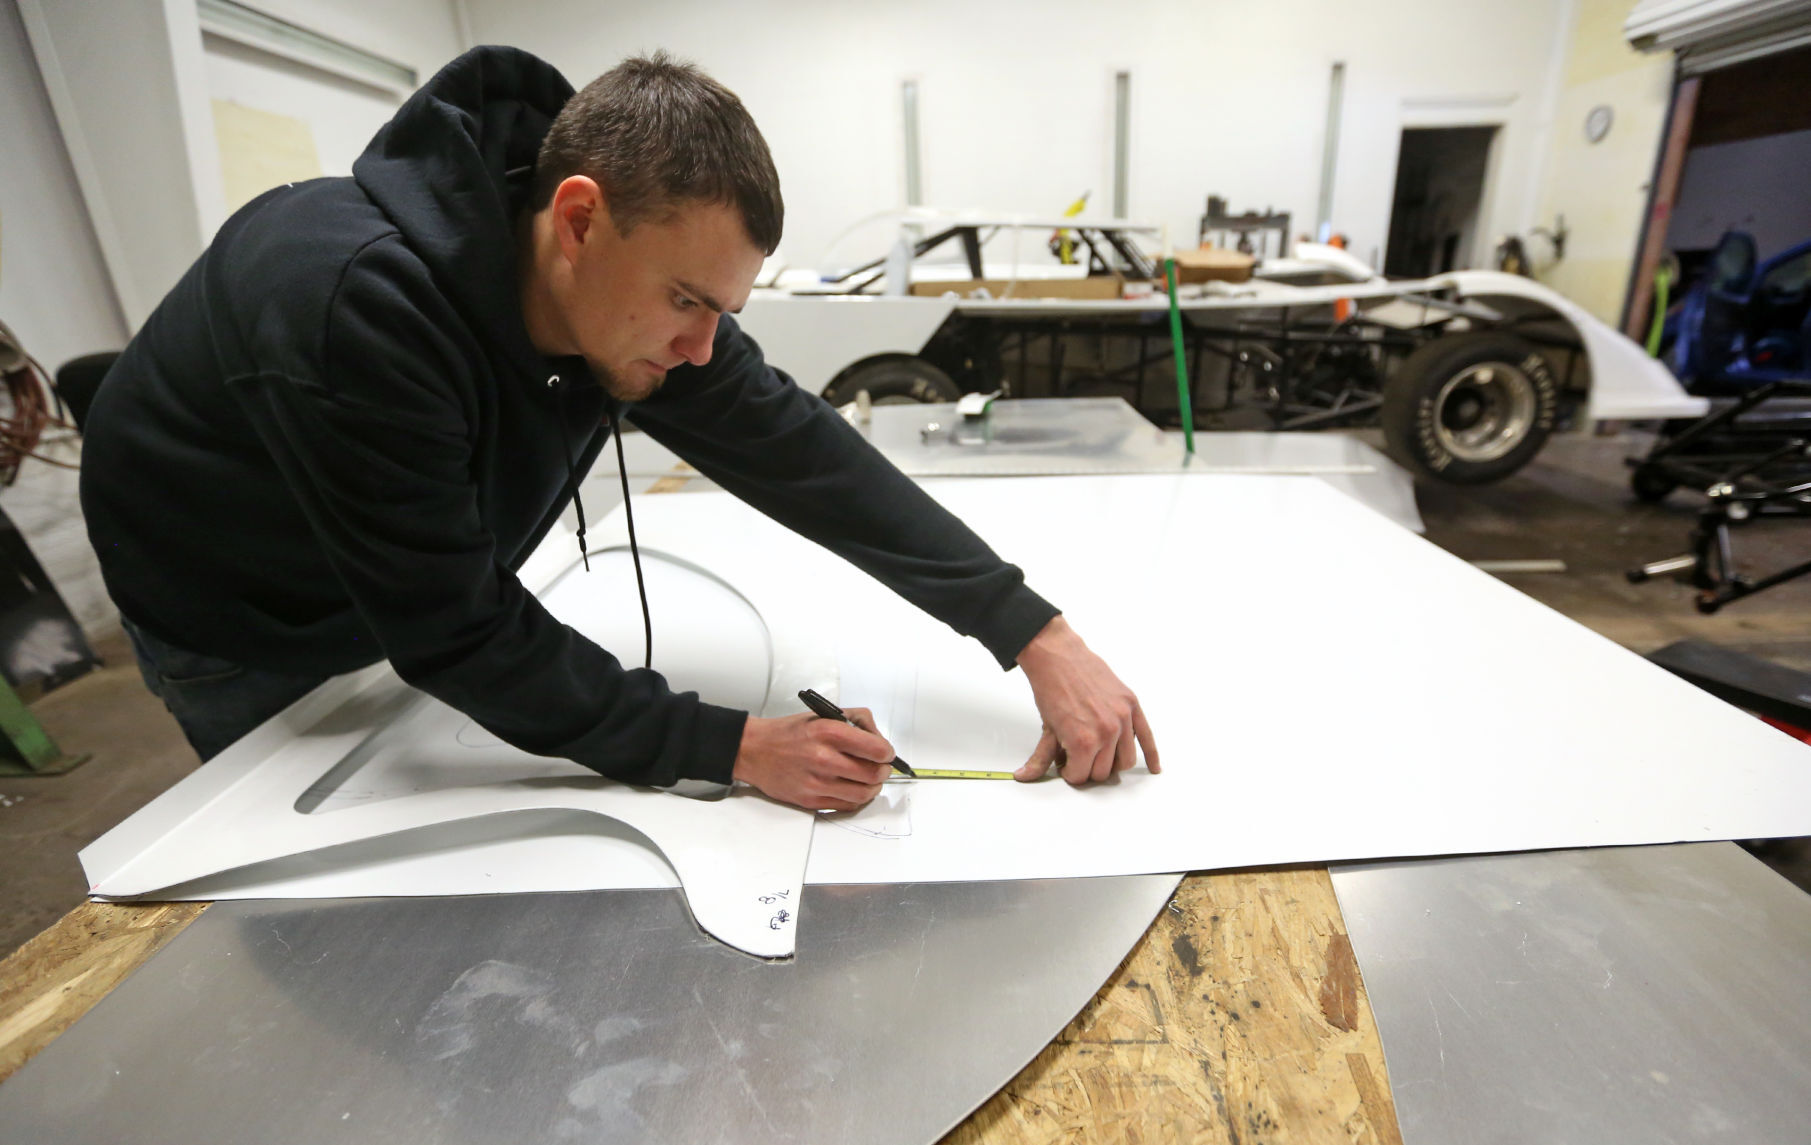 Tyler Madigan measures a piece of sheet metal while working on a roof of a late model racing car at TMR Enterprises in Dubuque on Friday, Jan. 15, 2021. PHOTO CREDIT: JESSICA REILLY